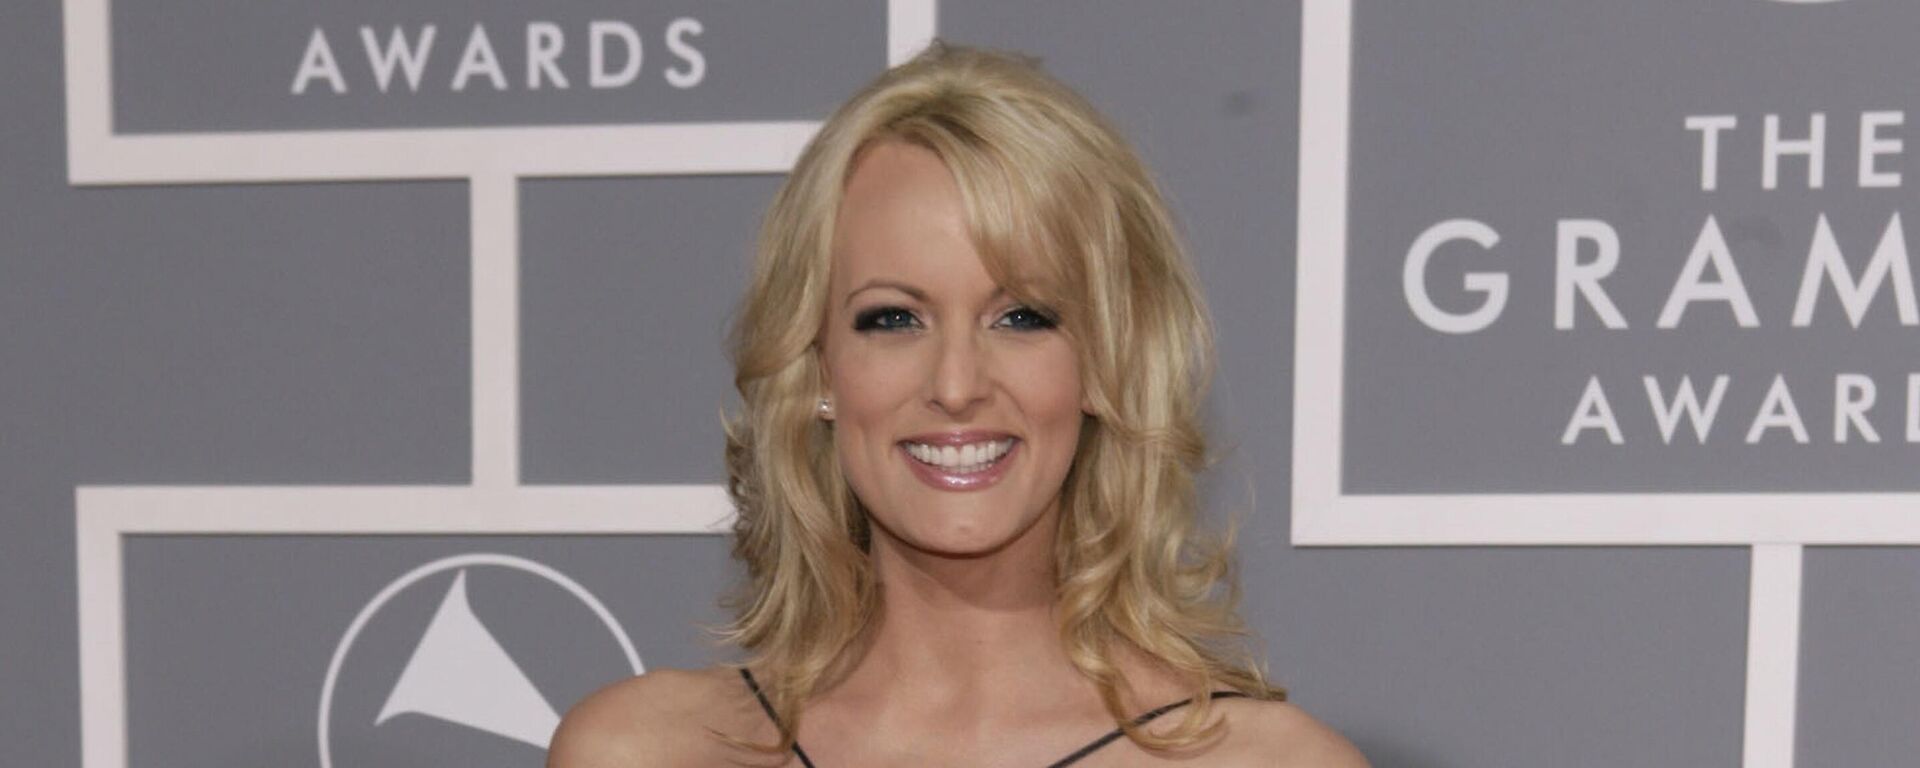 Adult film actress Stormy Daniels arrives for the 49th Annual Grammy Awards in Los Angeles on Feb. 11, 2007. - Sputnik International, 1920, 05.04.2023